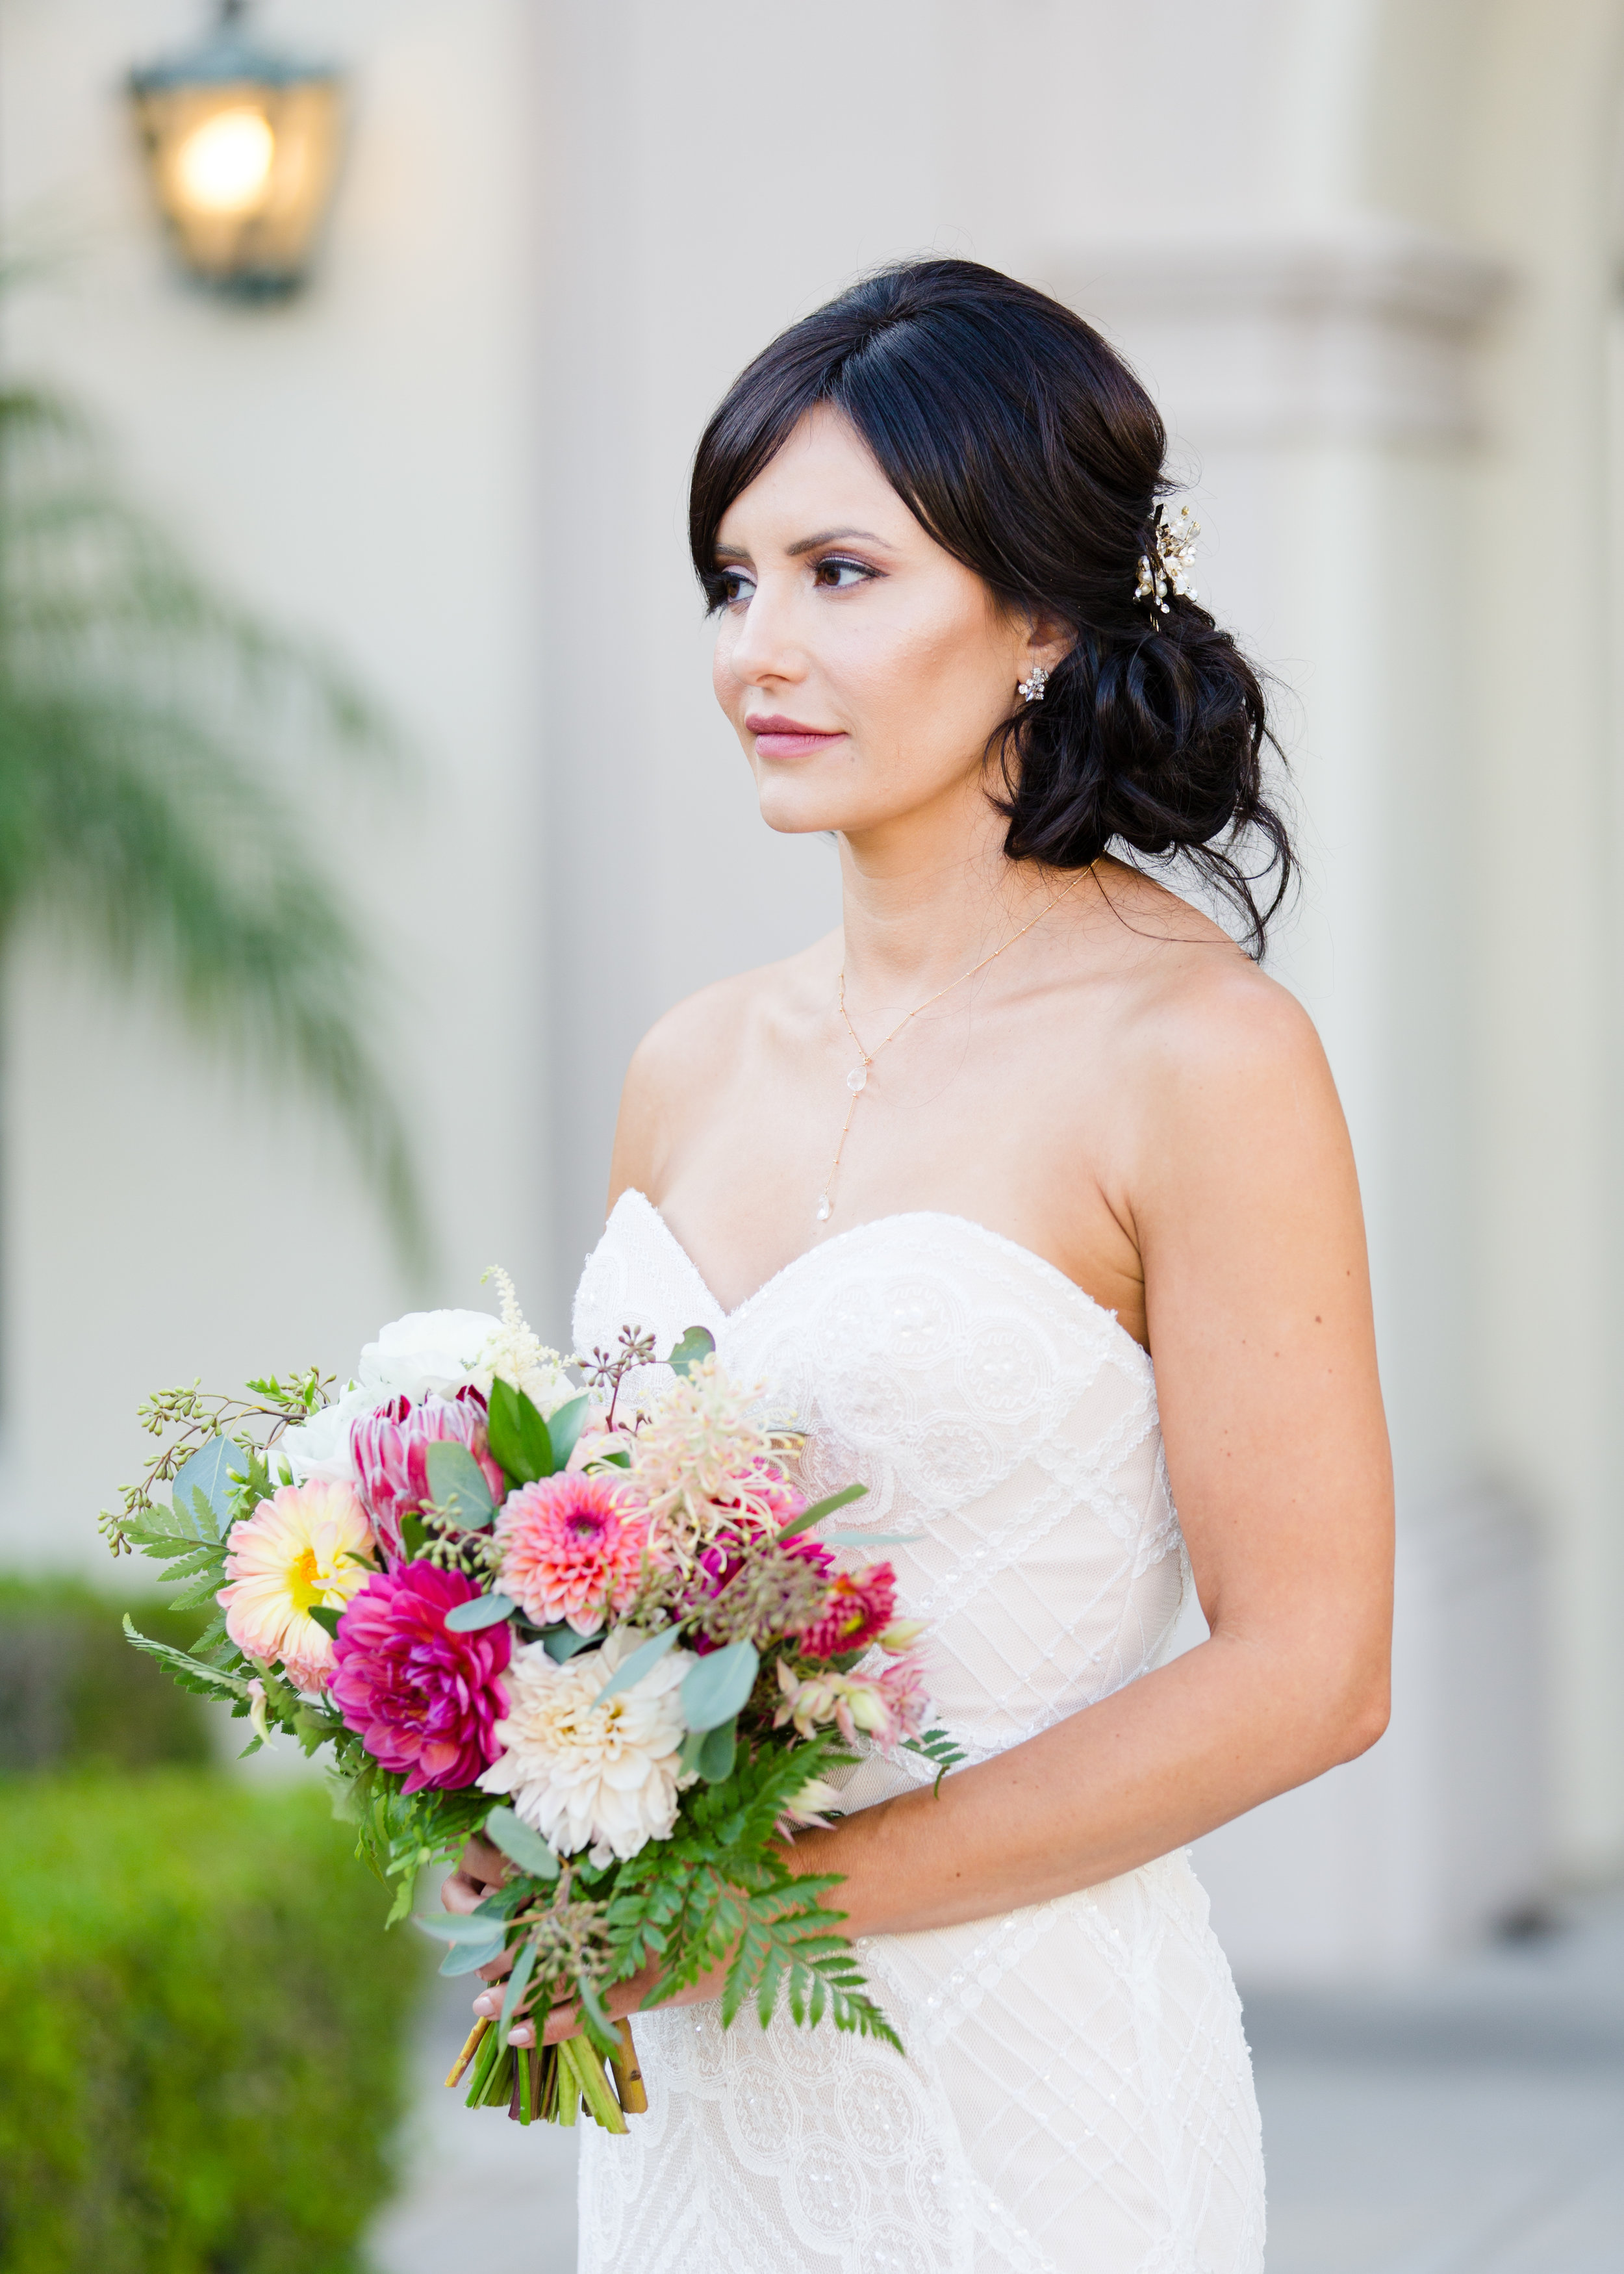 Brunette Bride with Updo Hairstyle holding bouquet outside in Wedding Photography. Bridal Hair and Makeup by Vanity Belle in Orange County (Costa Mesa) and San Diego (La Jolla)